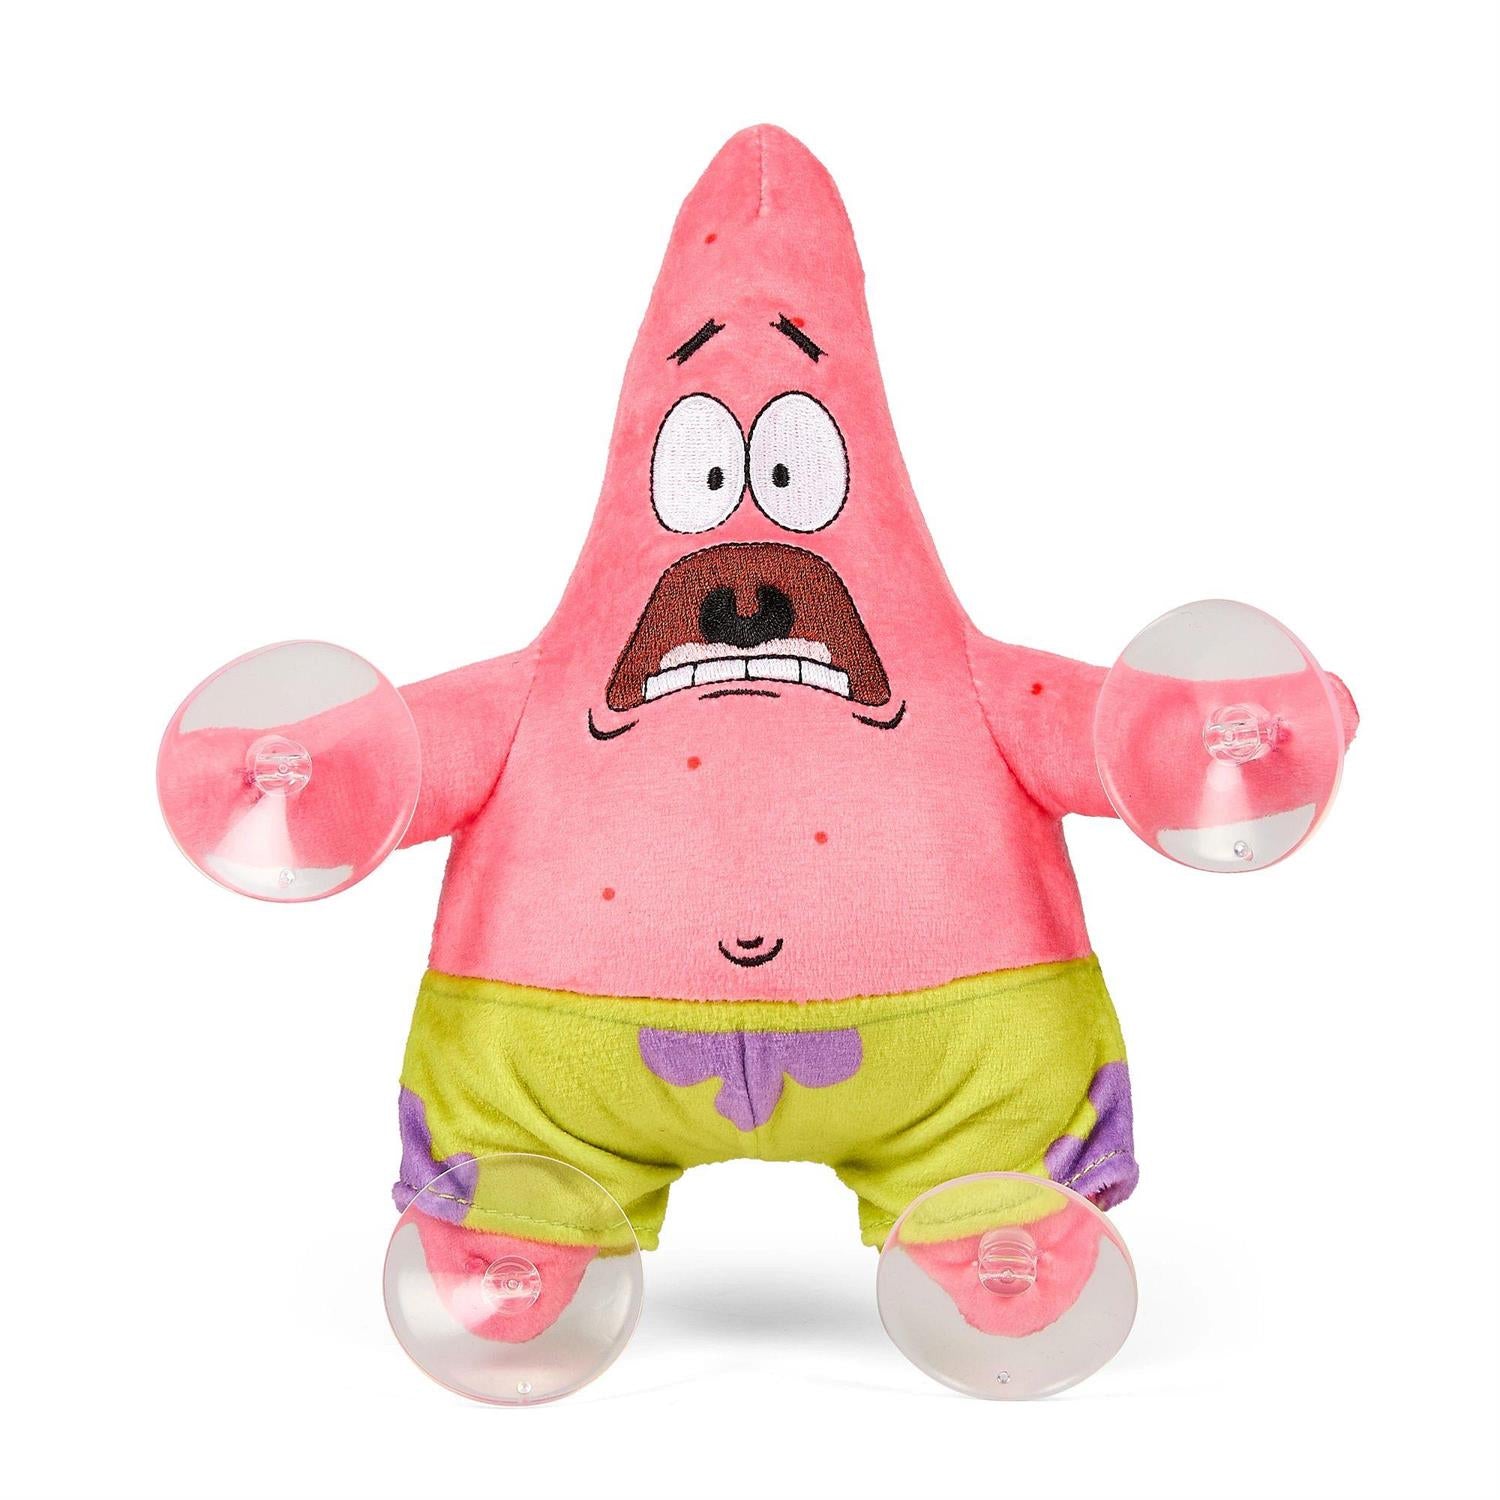 Nick ‘90s Scared Patrick Plush with Suction Cups, 7.874 Inches Tall